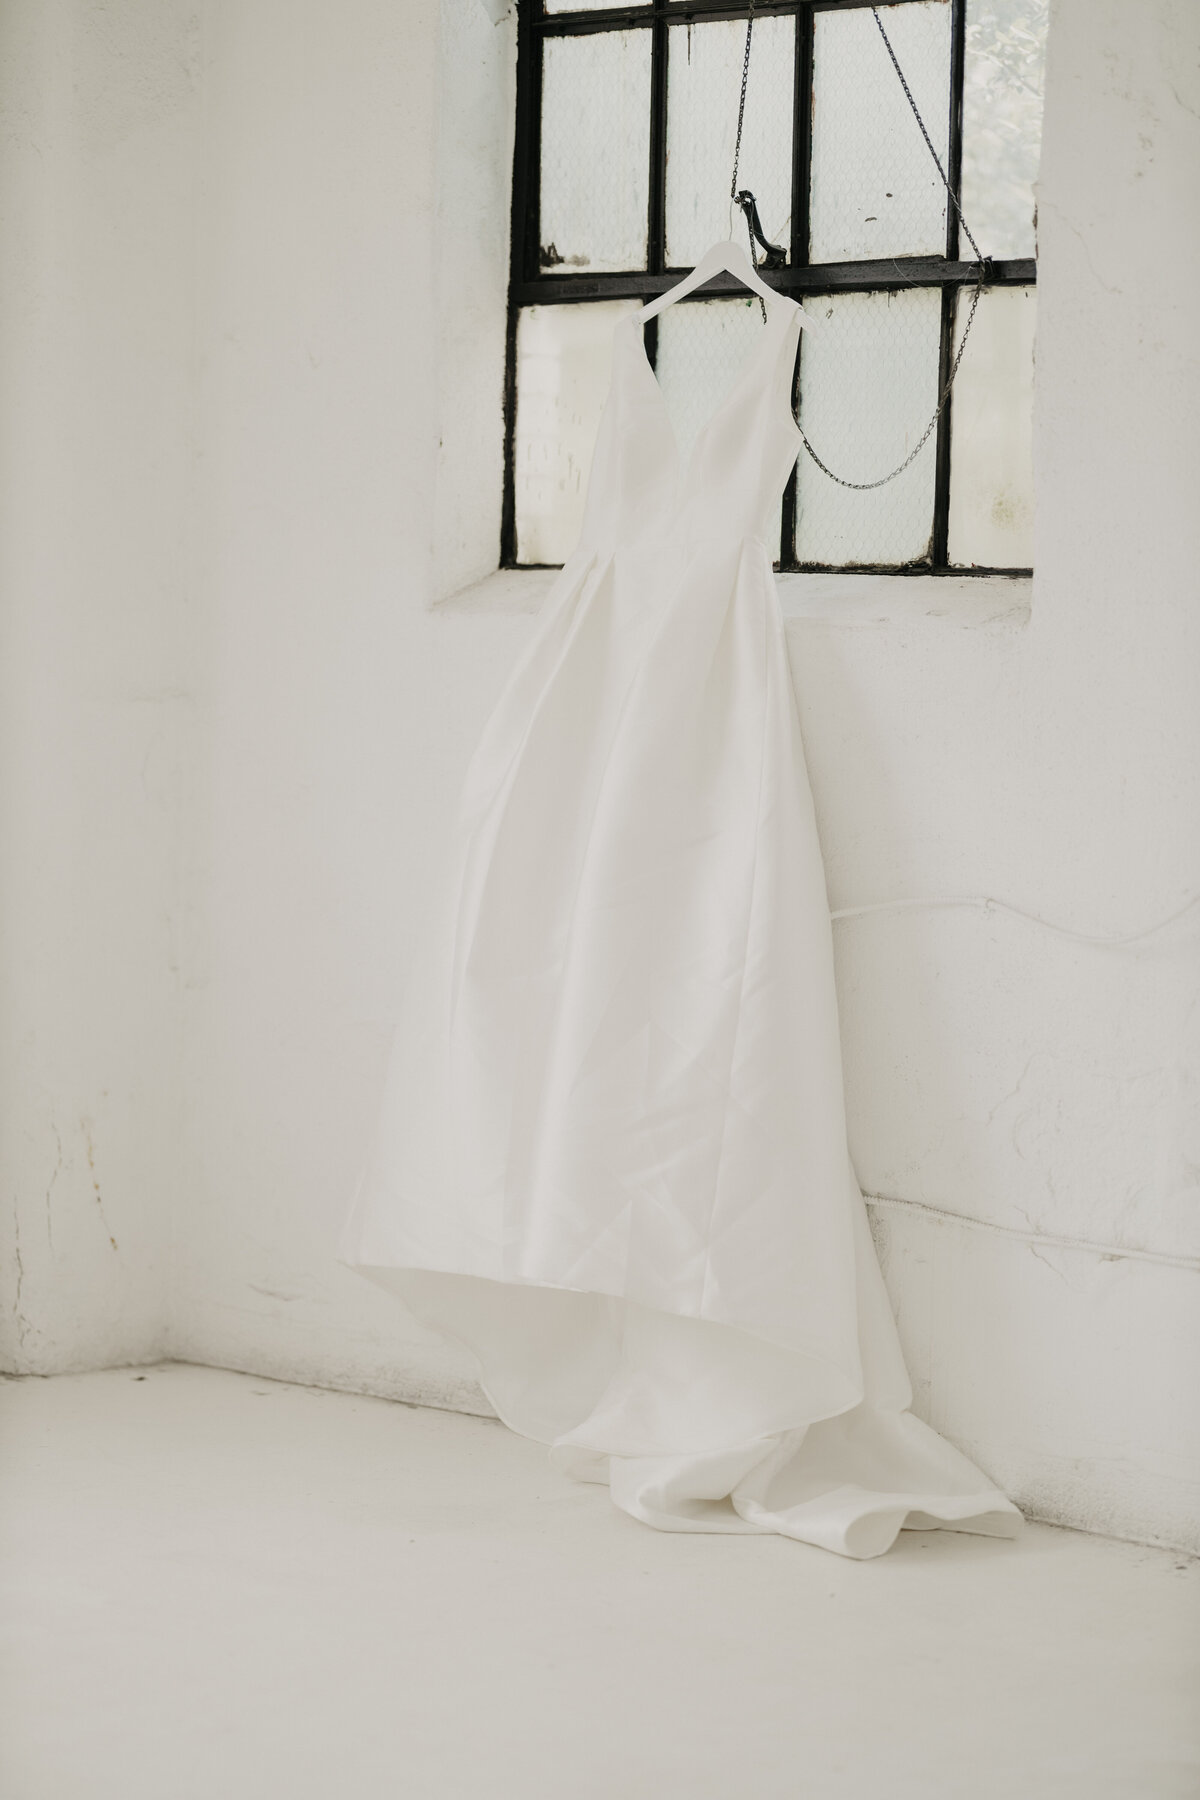 a wedding gown hanging from a window